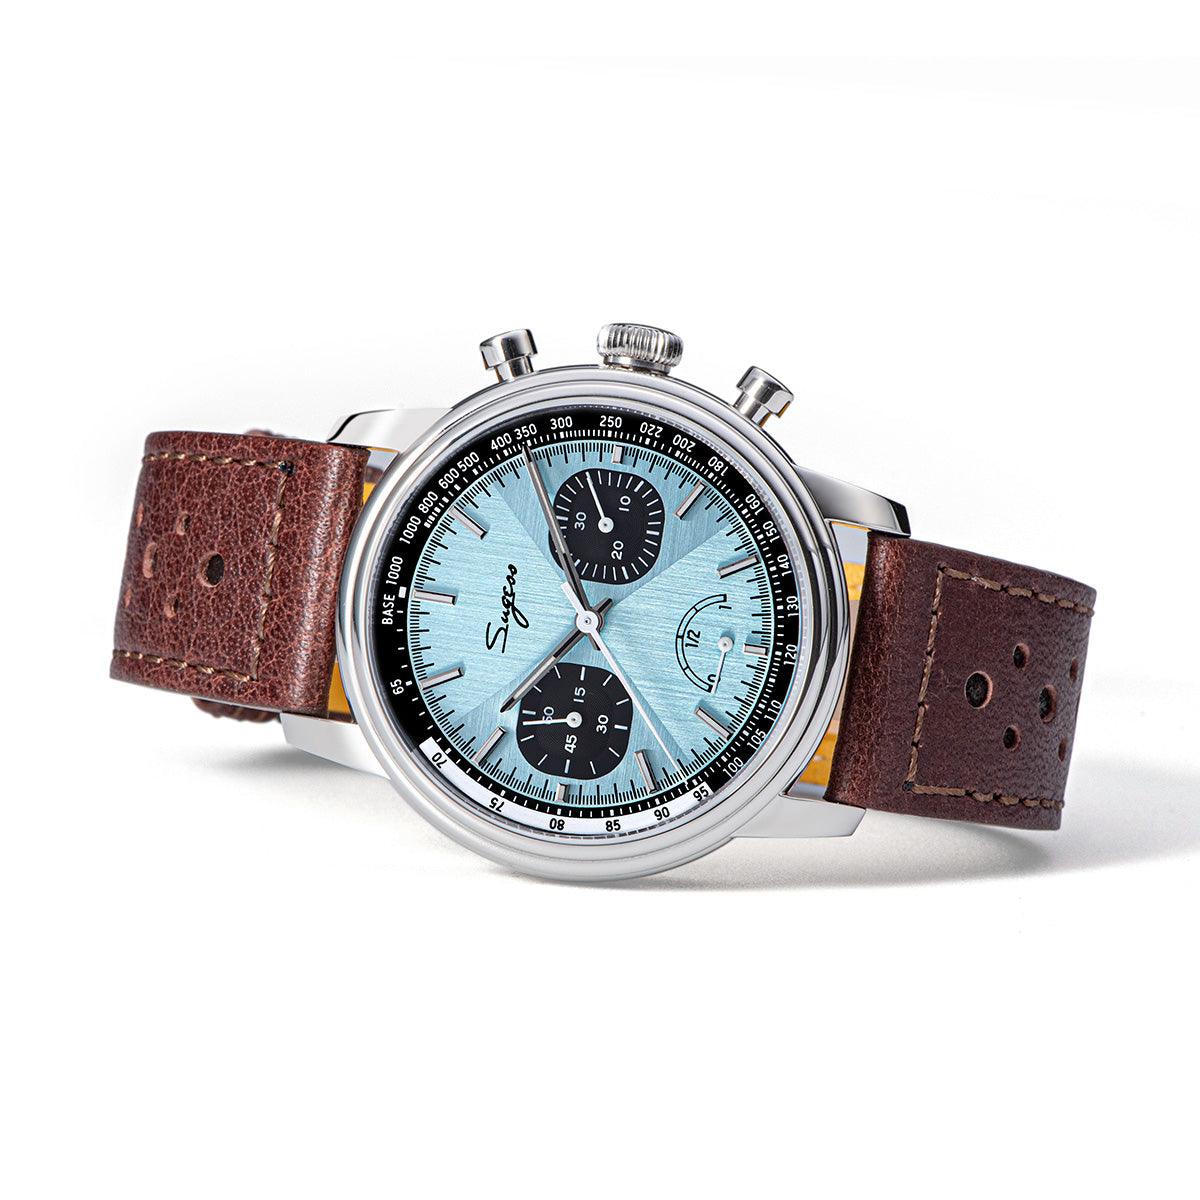 Sugess ST1906 Tiffany Blue Dial Multi-Function Mechanical Power Reserve Seagull Movement Men's Watch - Murphy Johnson Watches Co.